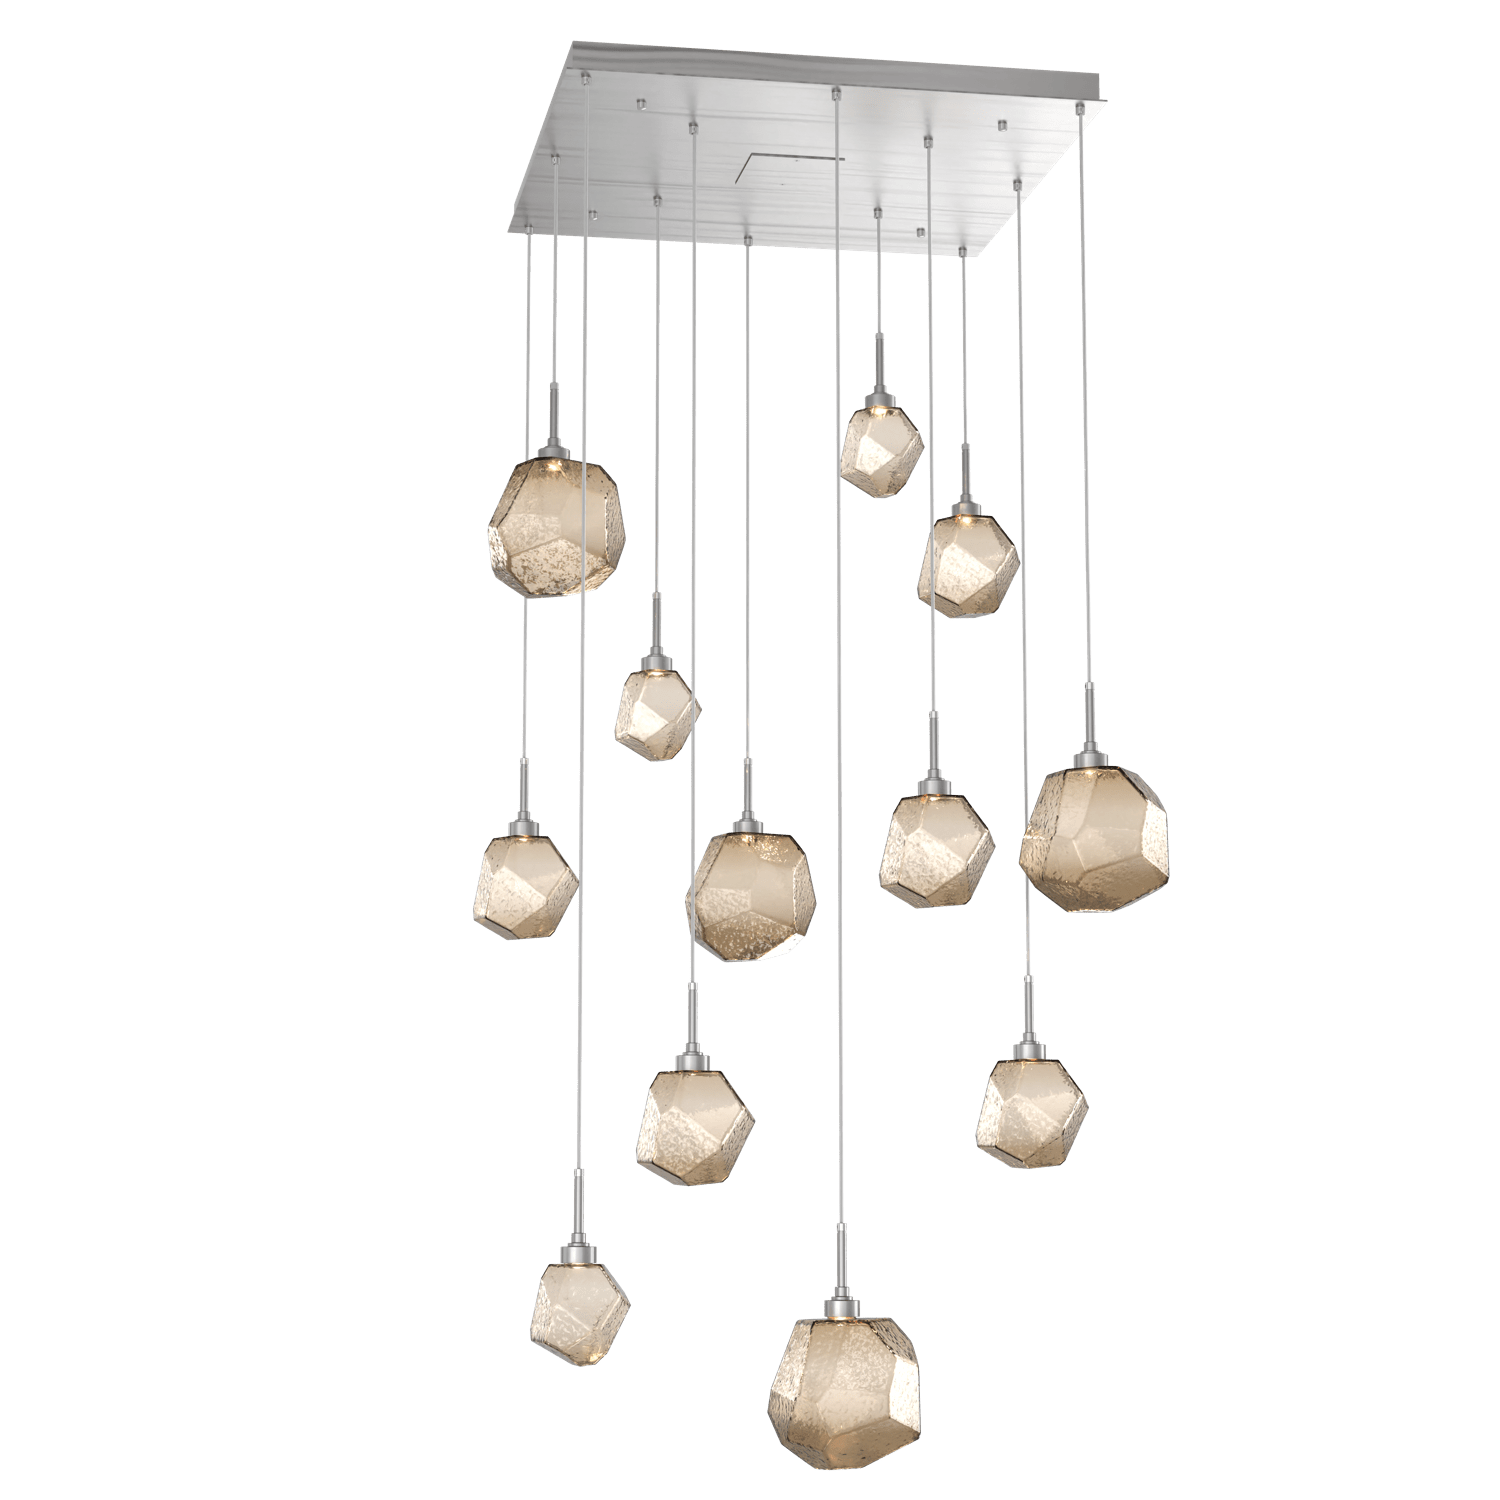 CHB0039-12-SN-B-Hammerton-Studio-Gem-12-light-square-pendant-chandelier-with-satin-nickel-finish-and-bronze-blown-glass-shades-and-LED-lamping